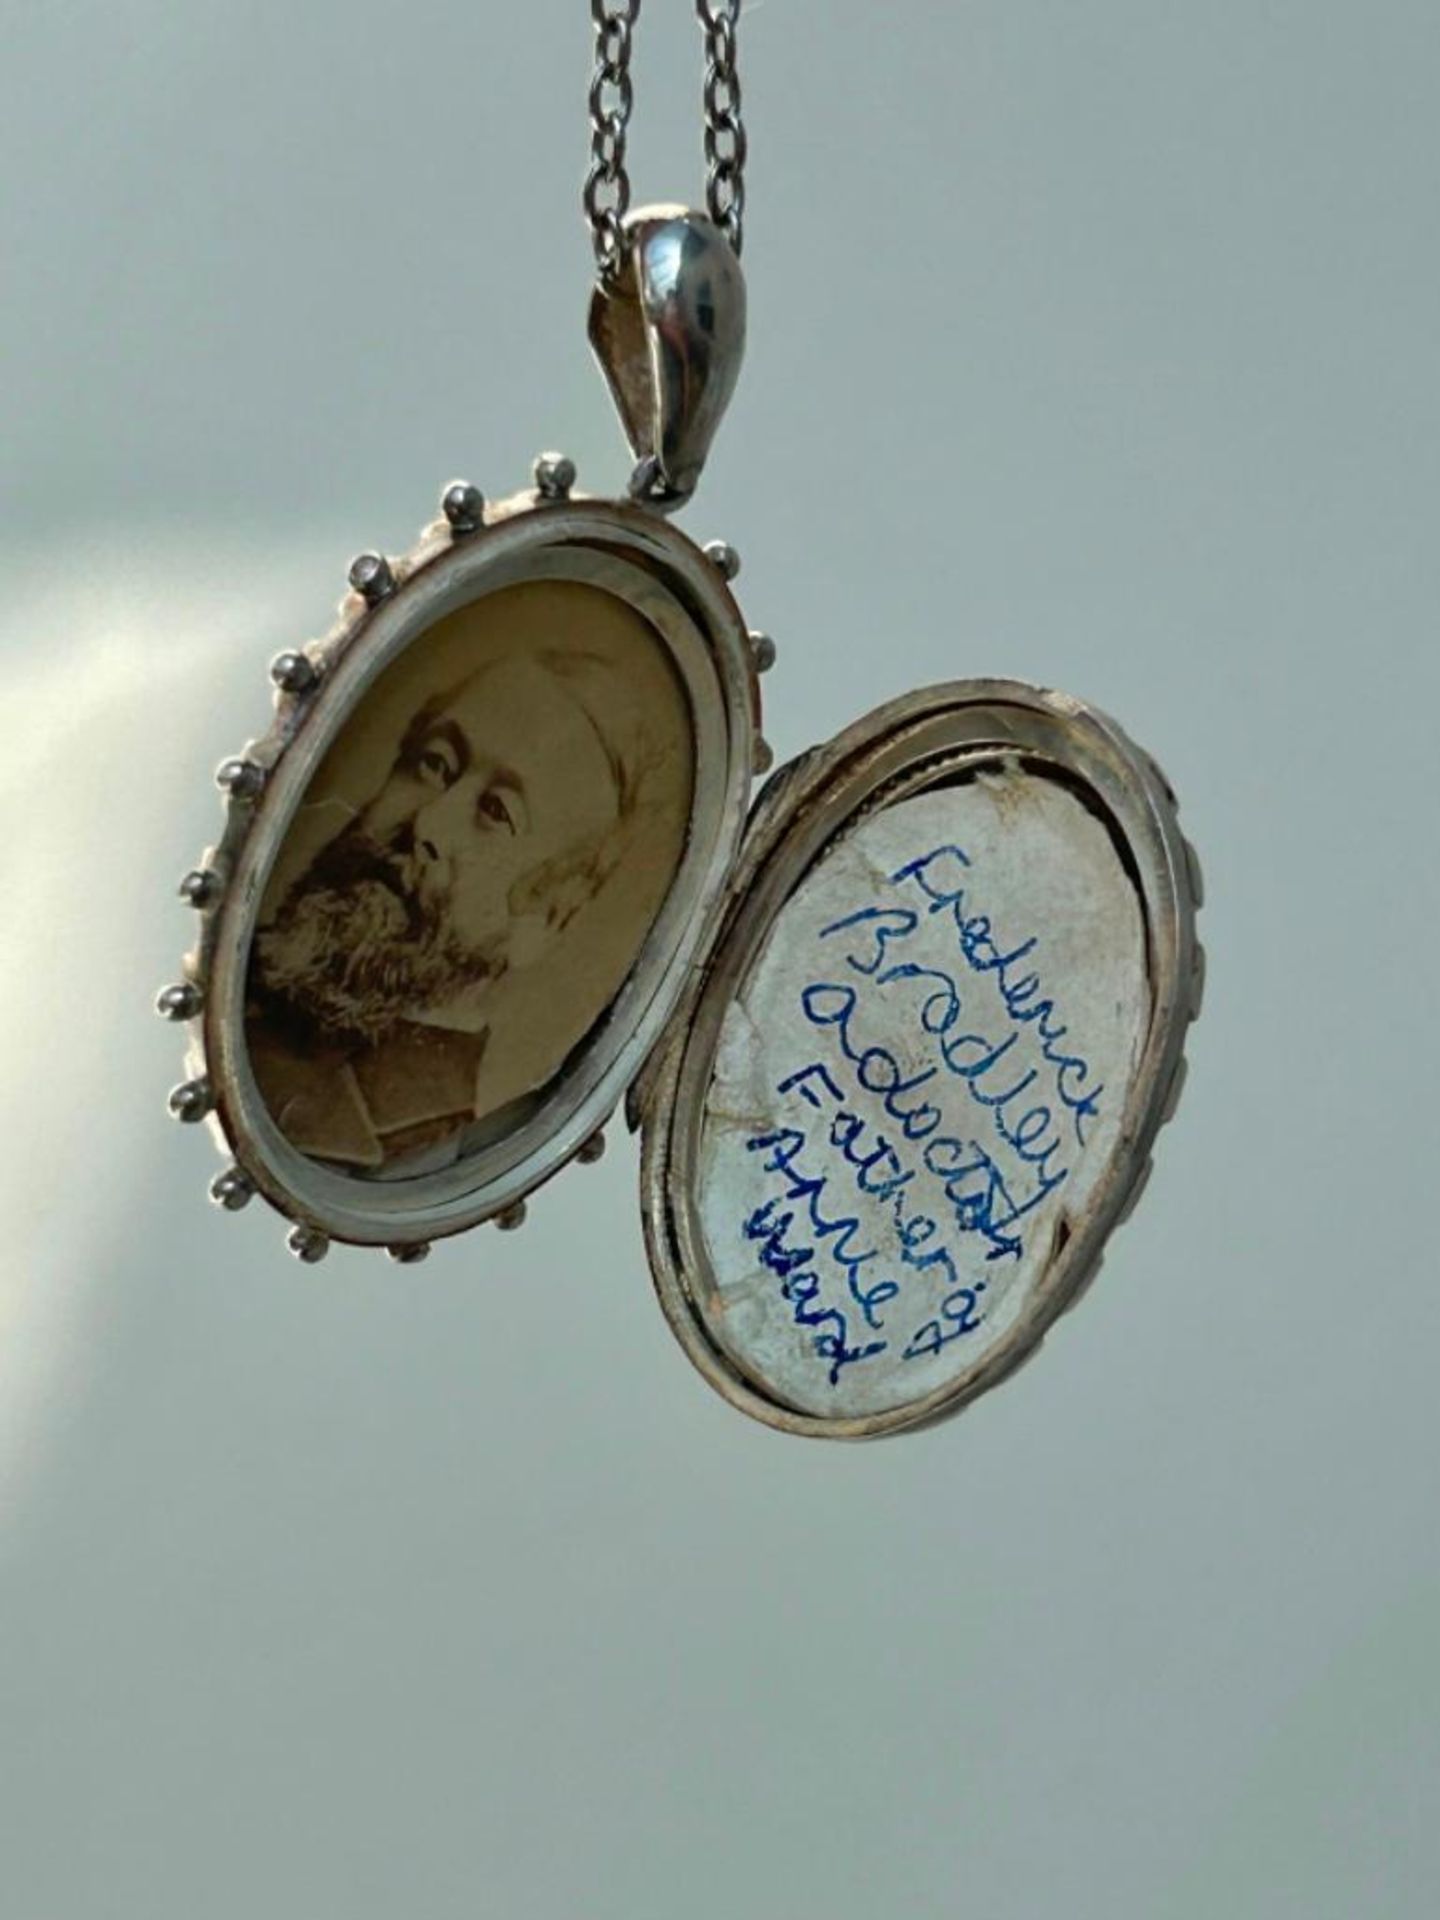 Victorian Era Aesthetic Silver Pendant on Chain - Image 5 of 5